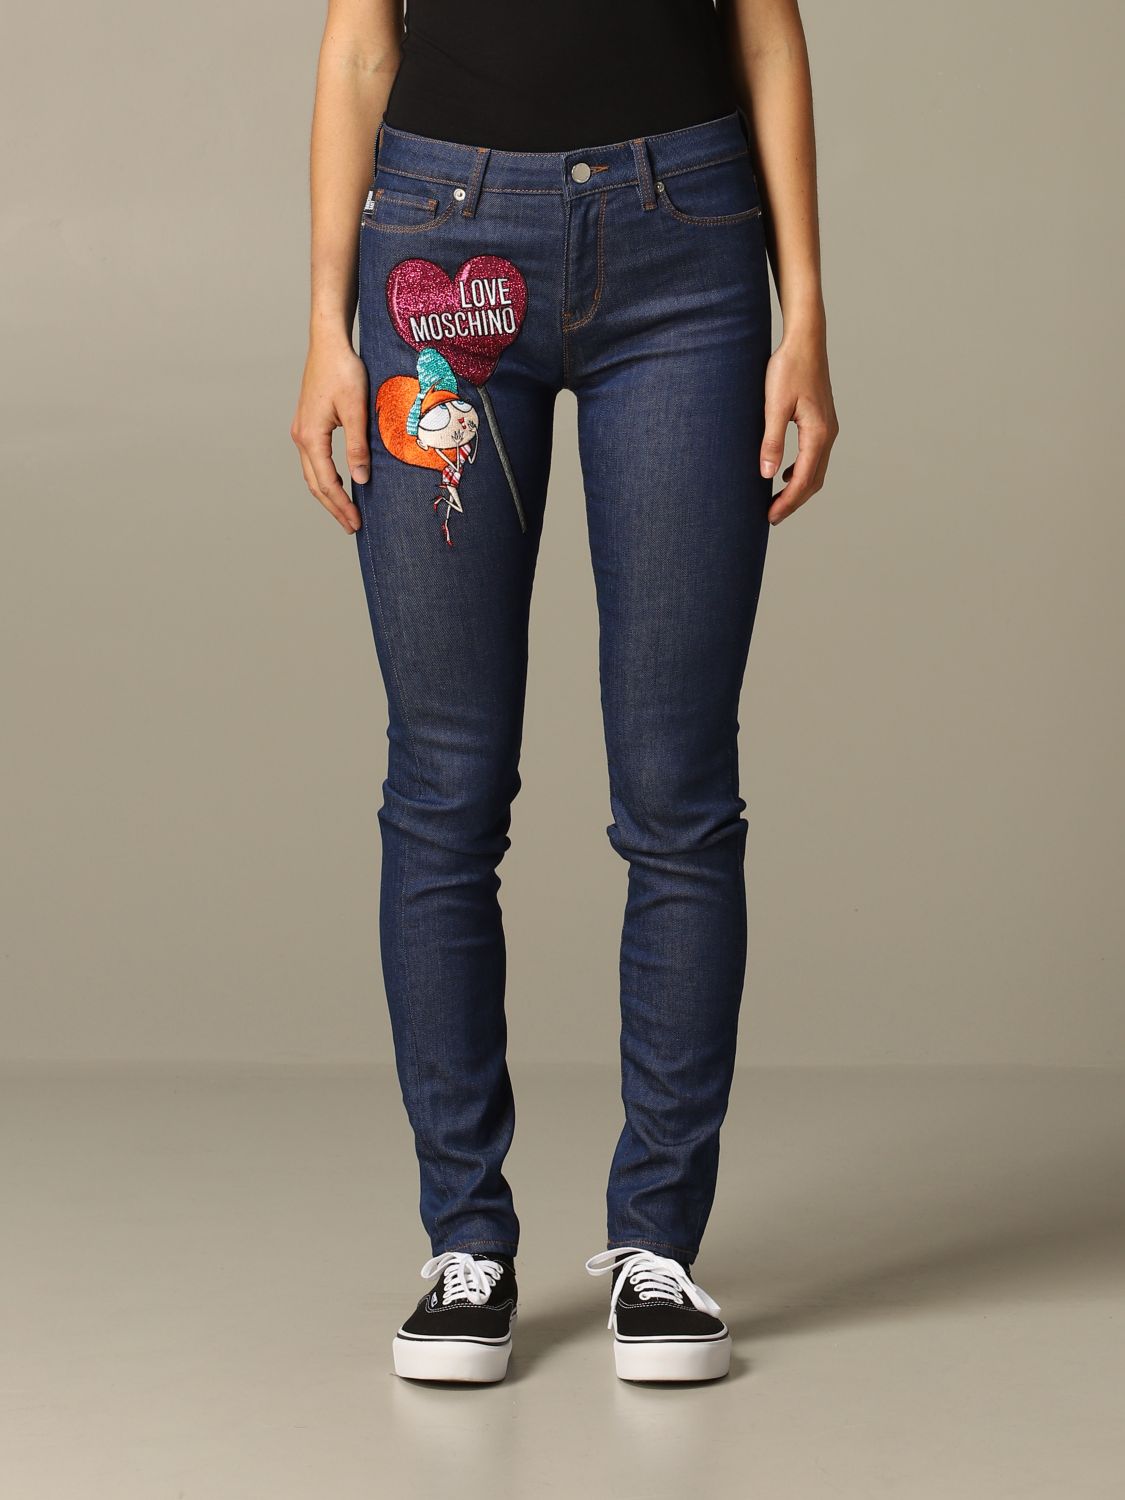 Love Moschino Outlet: Jeans women 